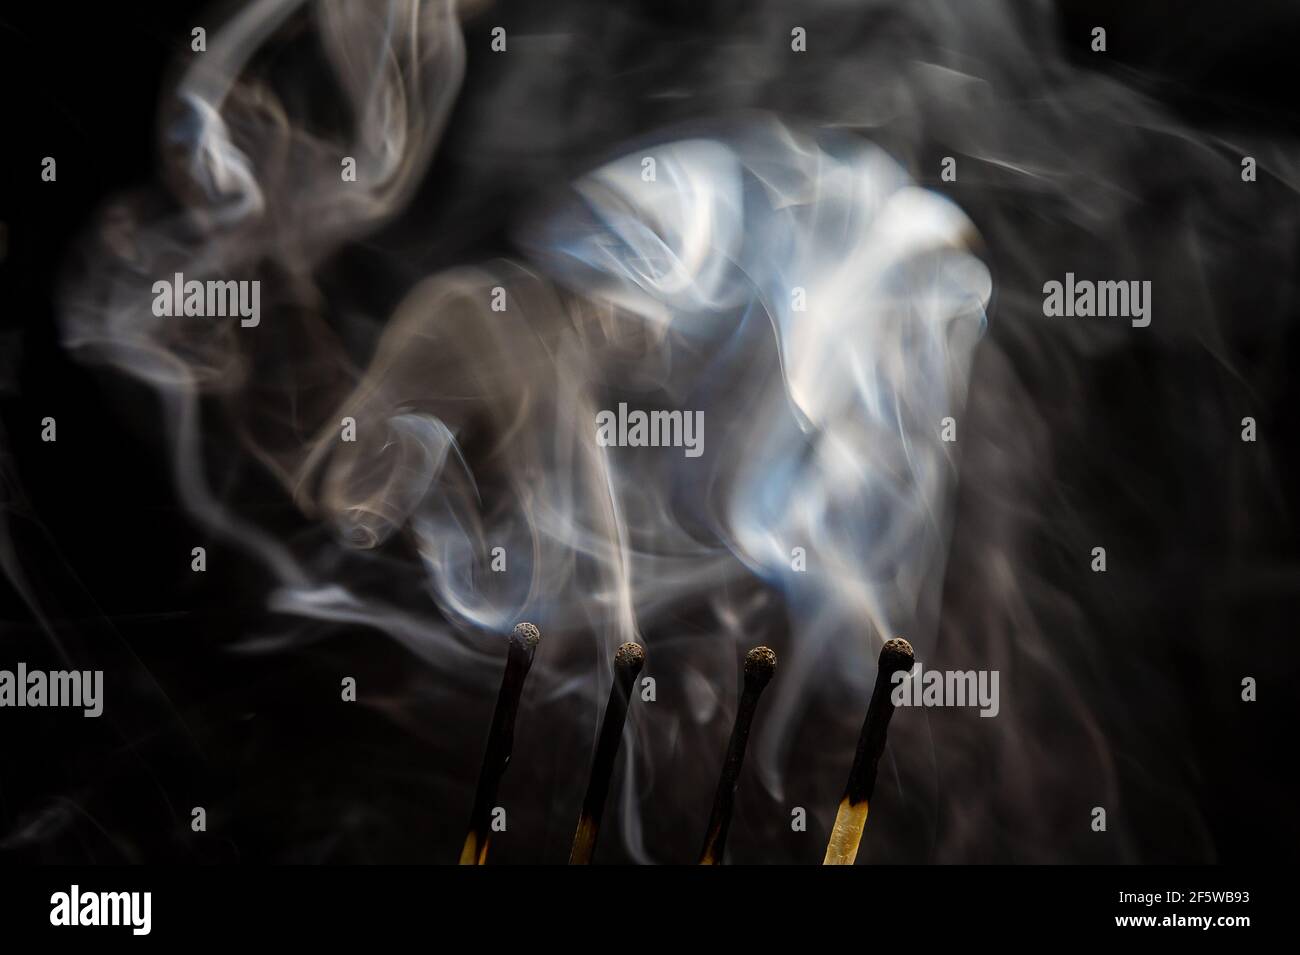 several burnt matches with white smoke on a black background Stock Photo